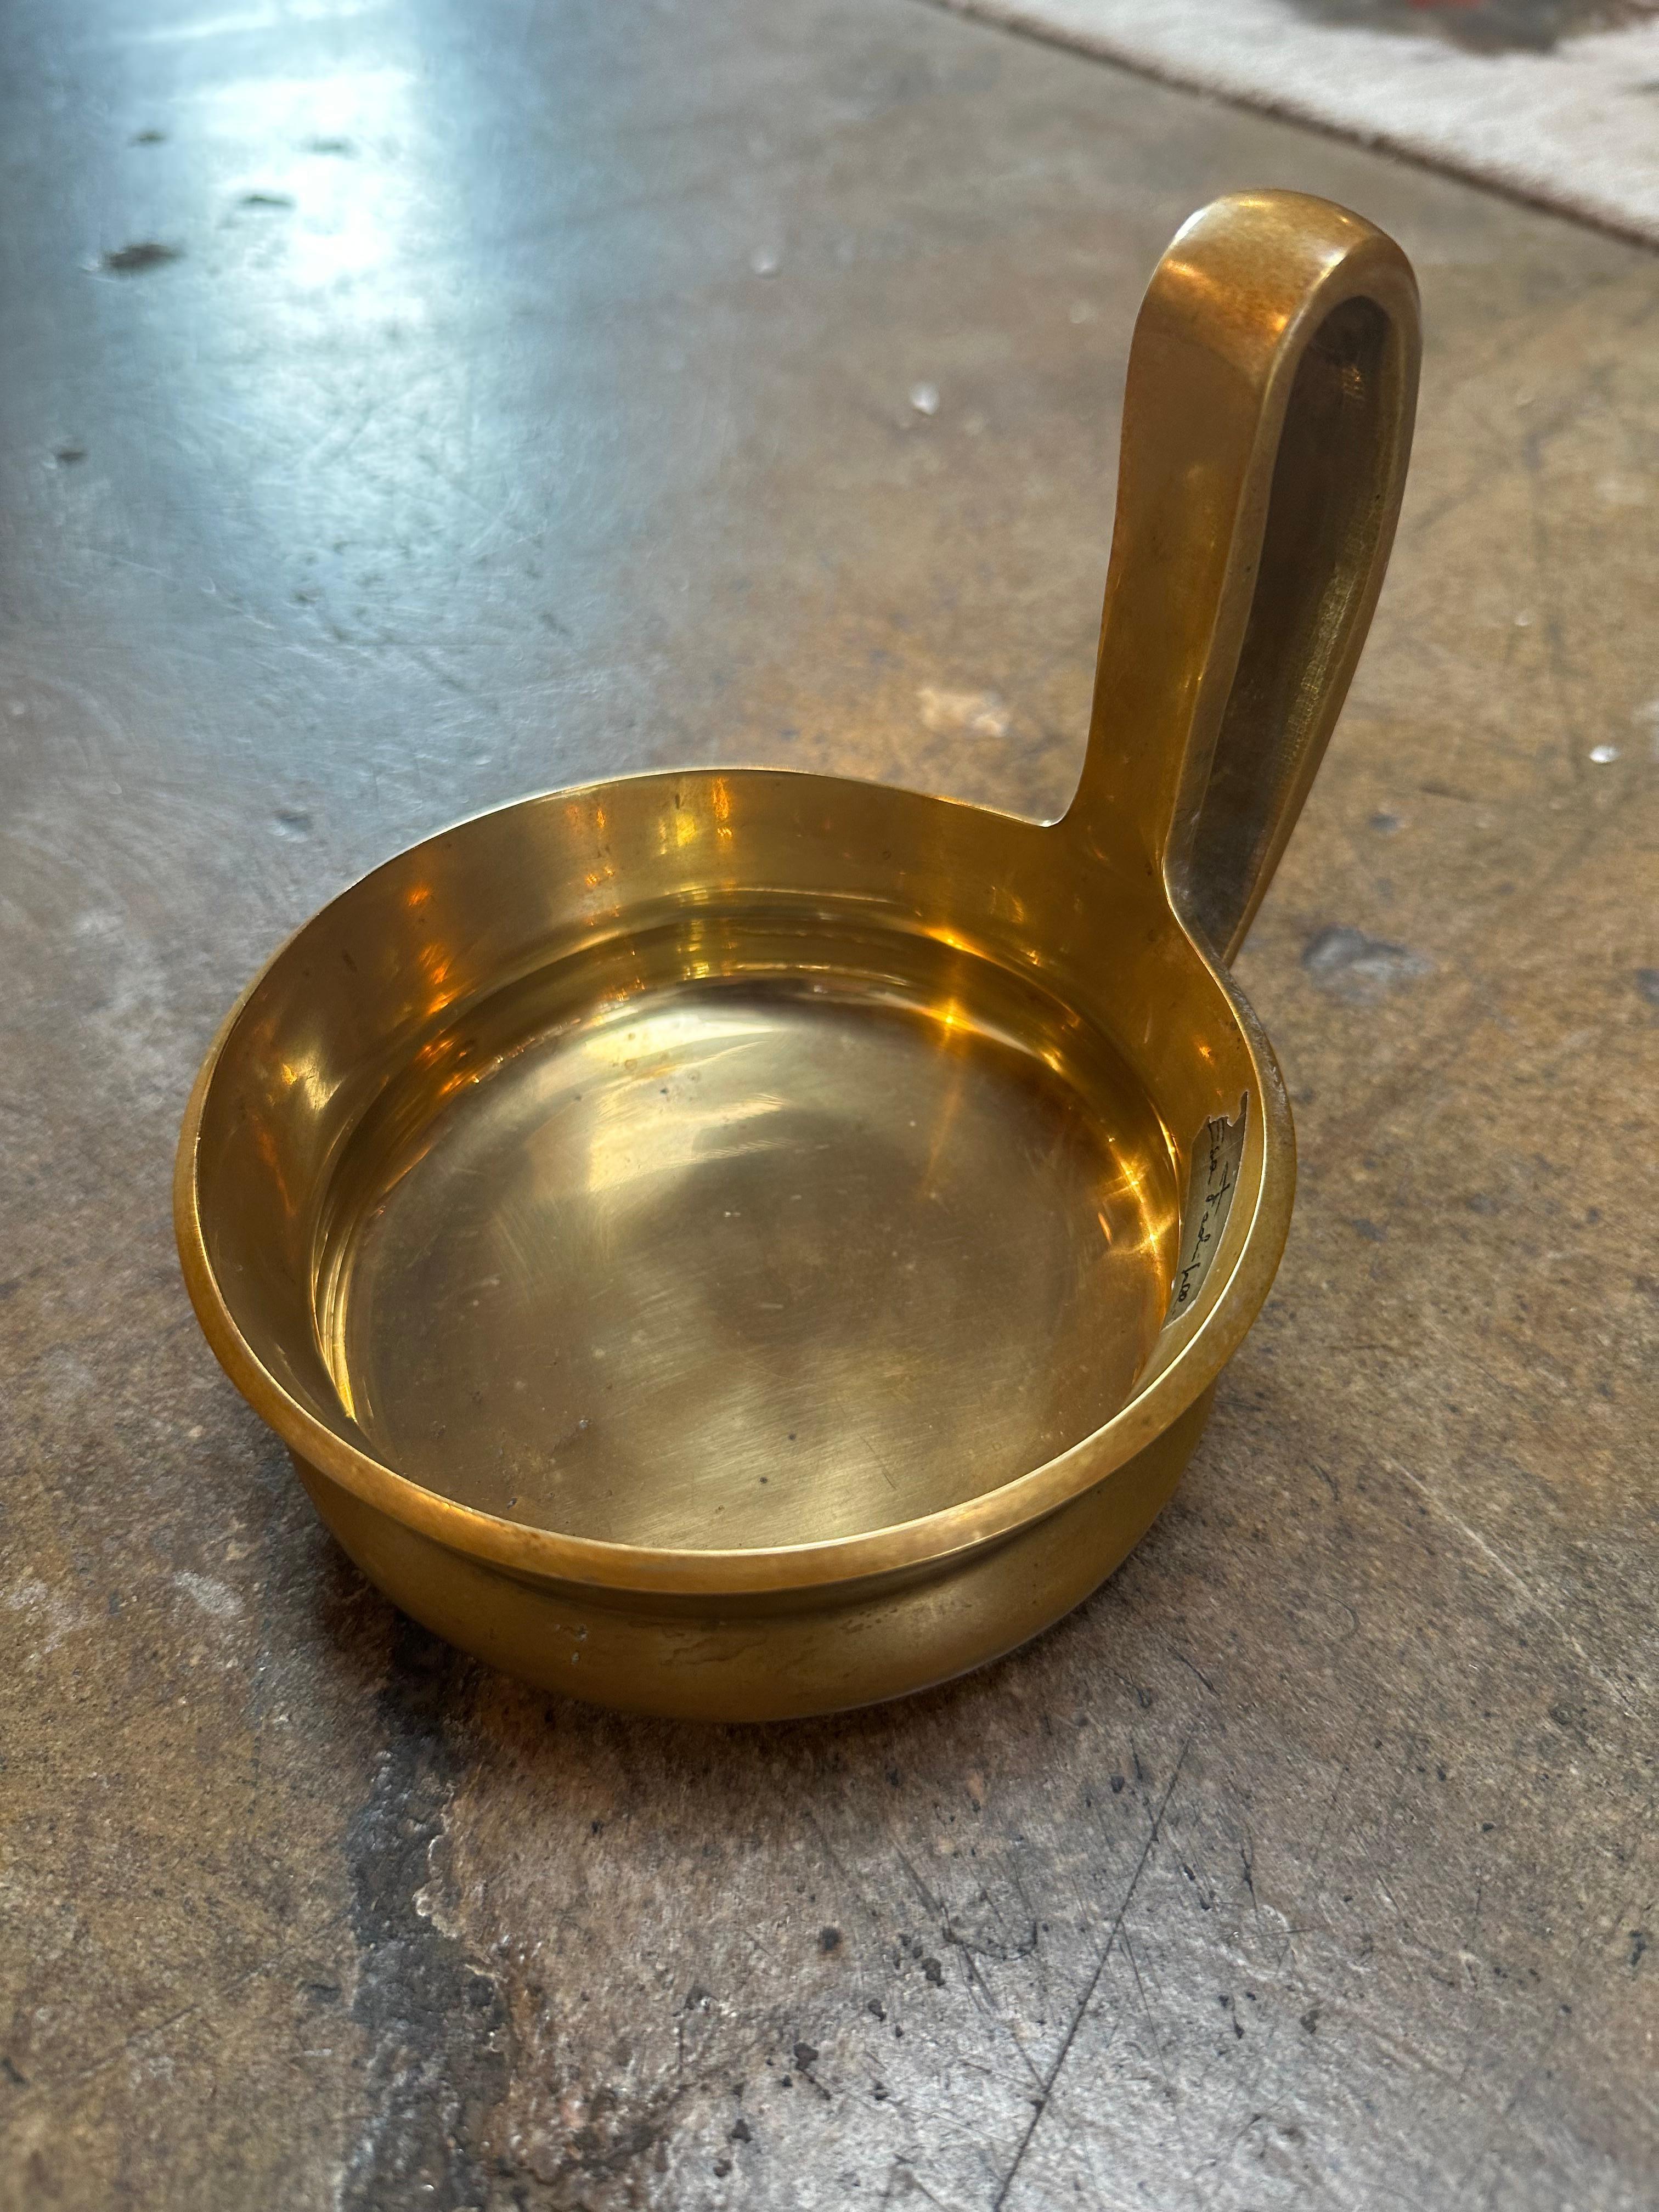 Beautiful Italian decorative fully brass center bowl for candies.
